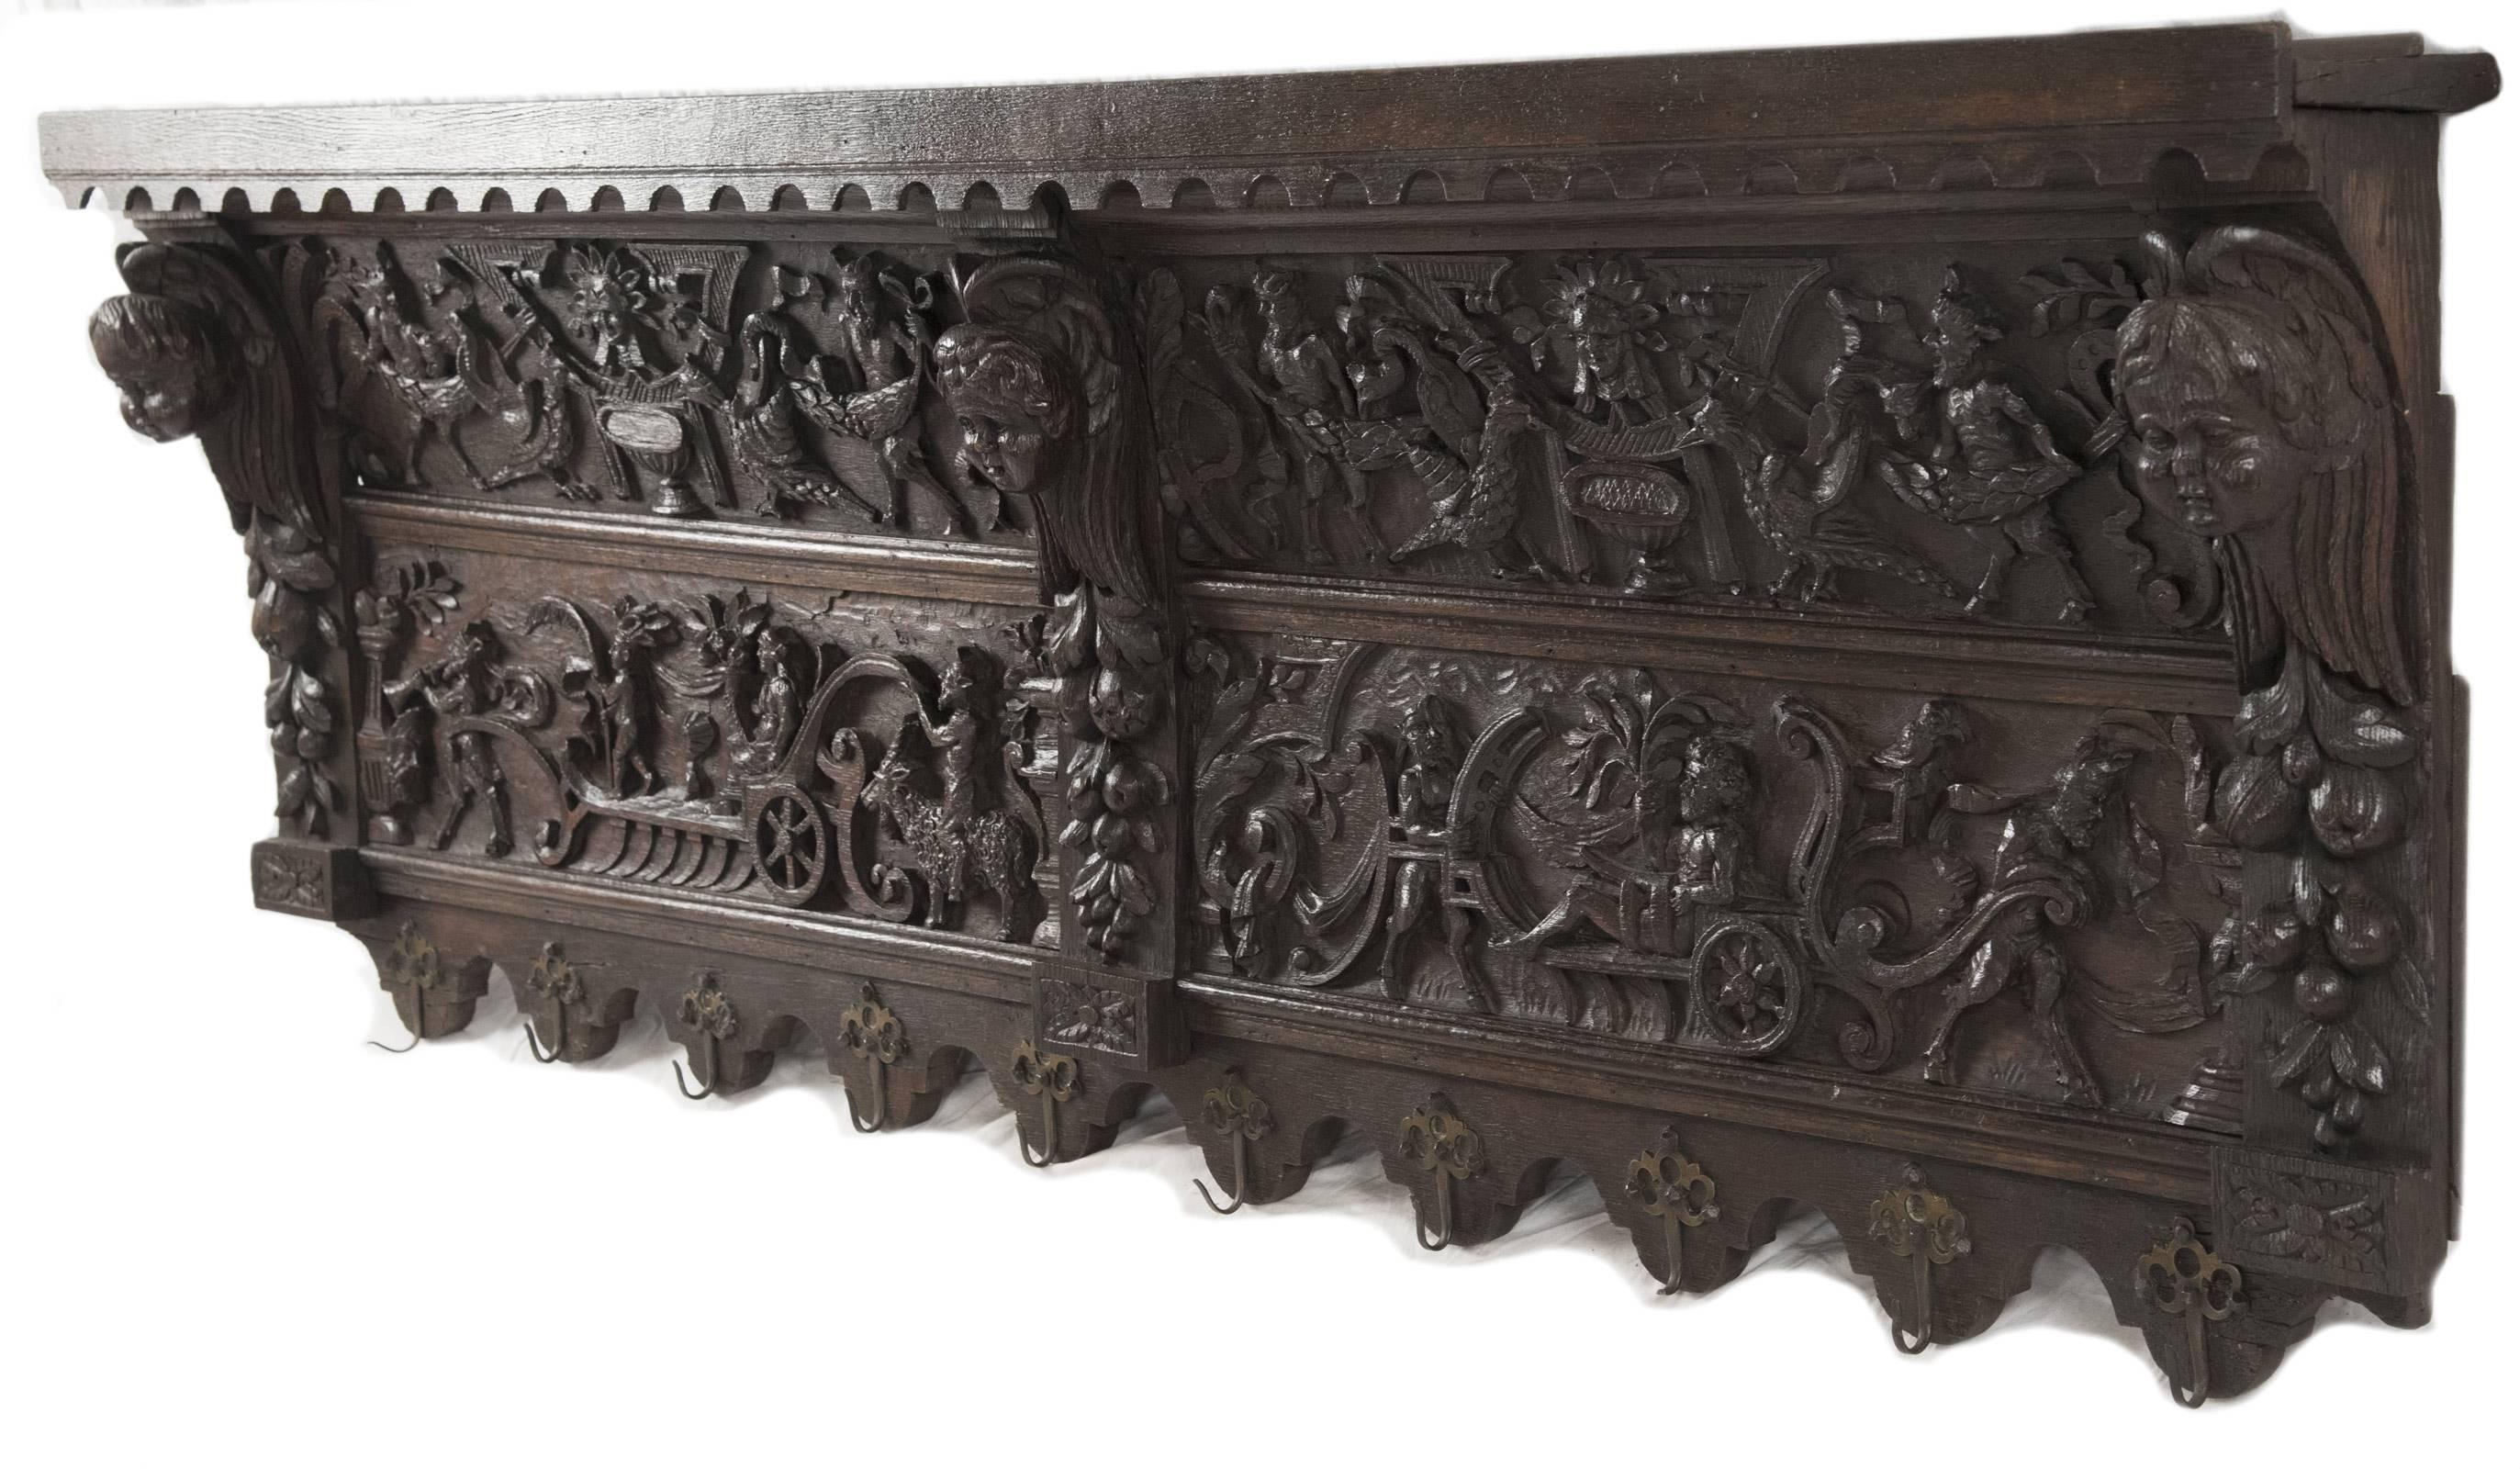 A 19th century French oak shelf with brass hooks, carved in high relief with images of centaurs, men and beasts in a procession celebrating the harvest, the decorative panels flanked by winged putti and garlands of fruit. Measures: 23 x 61 x 6 ½